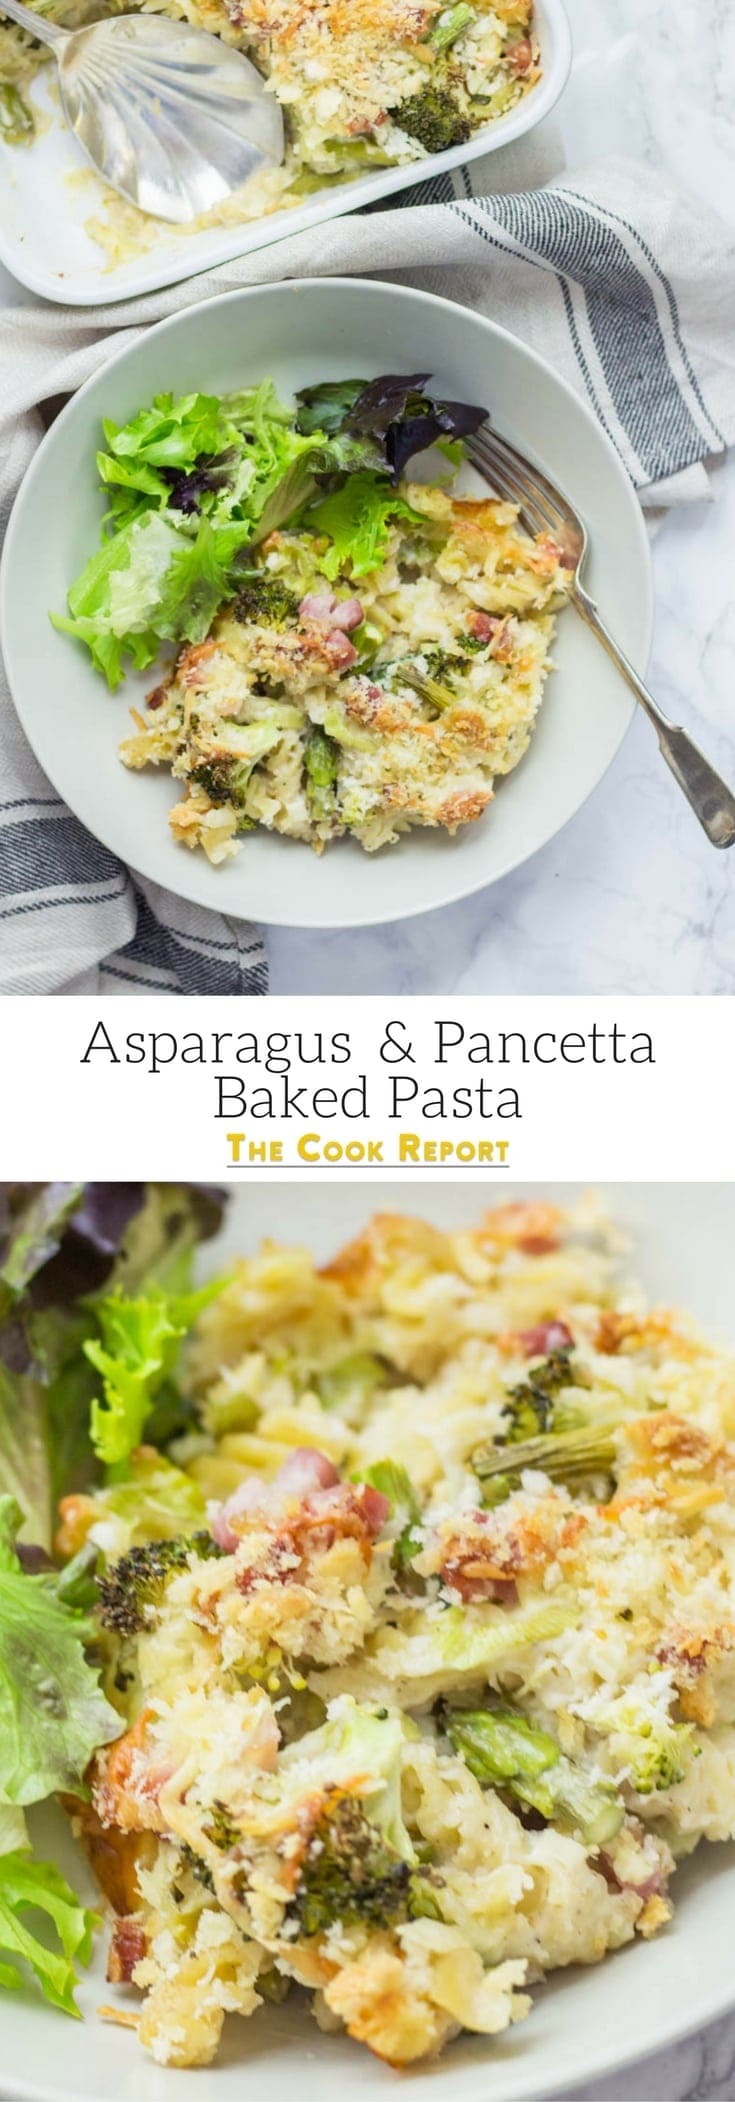 This asparagus & pancetta baked pasta is a perfect family dinner which also makes great leftovers eaten cold the next day.